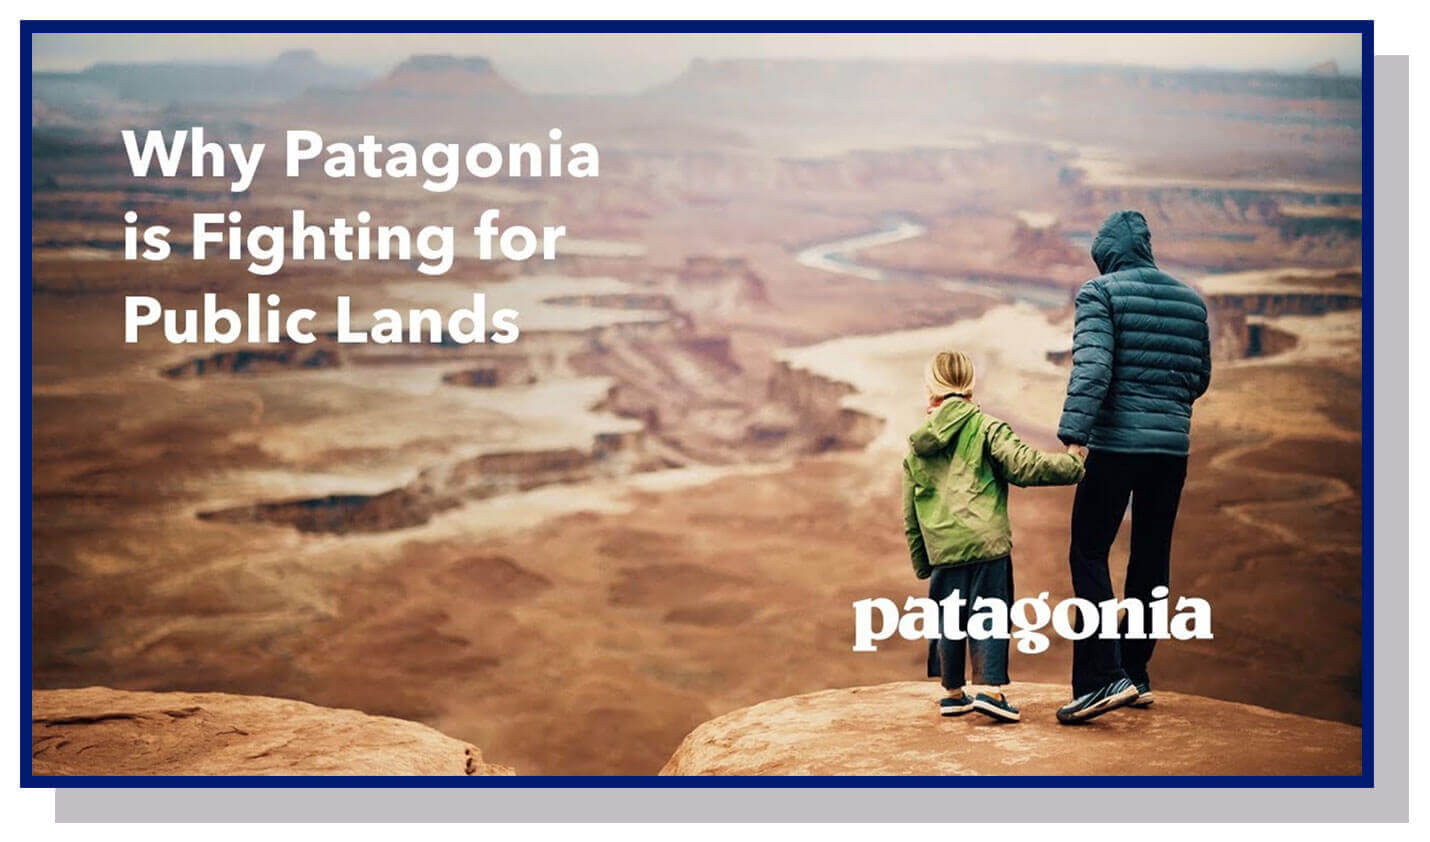 Patagonia's emotional branding strategy with public lands father and son admiring the grand canyon